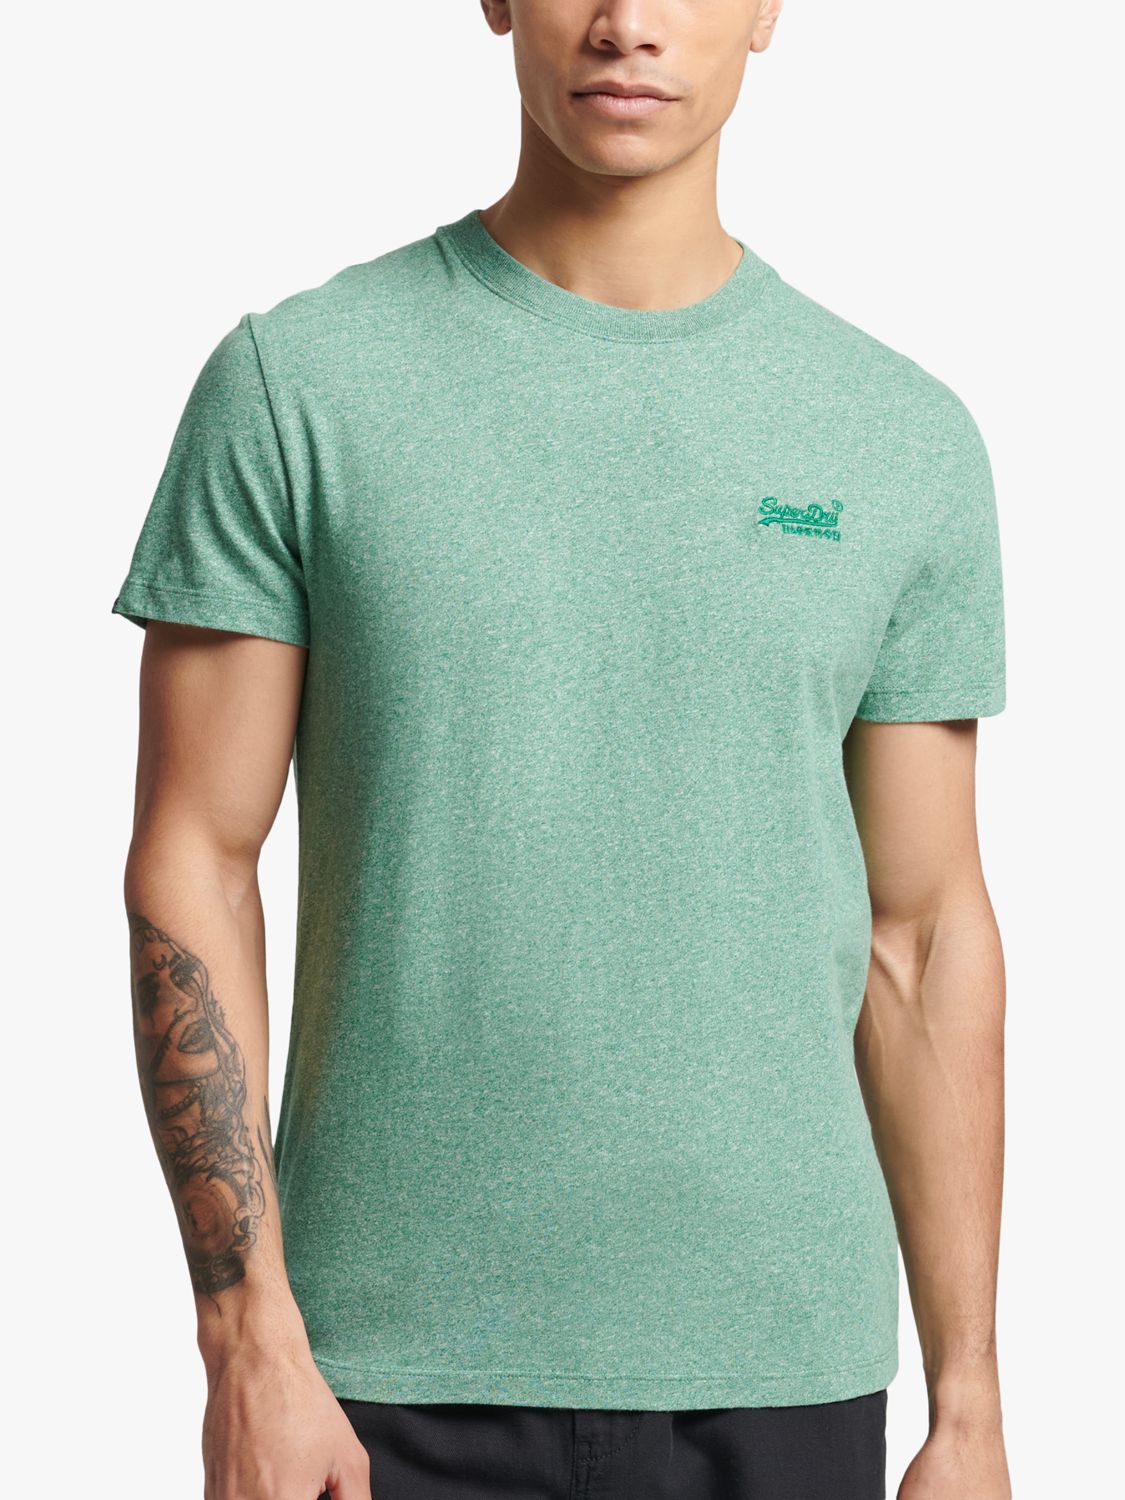 T-Shirt, Lewis Partners at Vintage John Logo Organic & Superdry Bright Green Cotton Embroidered Grit